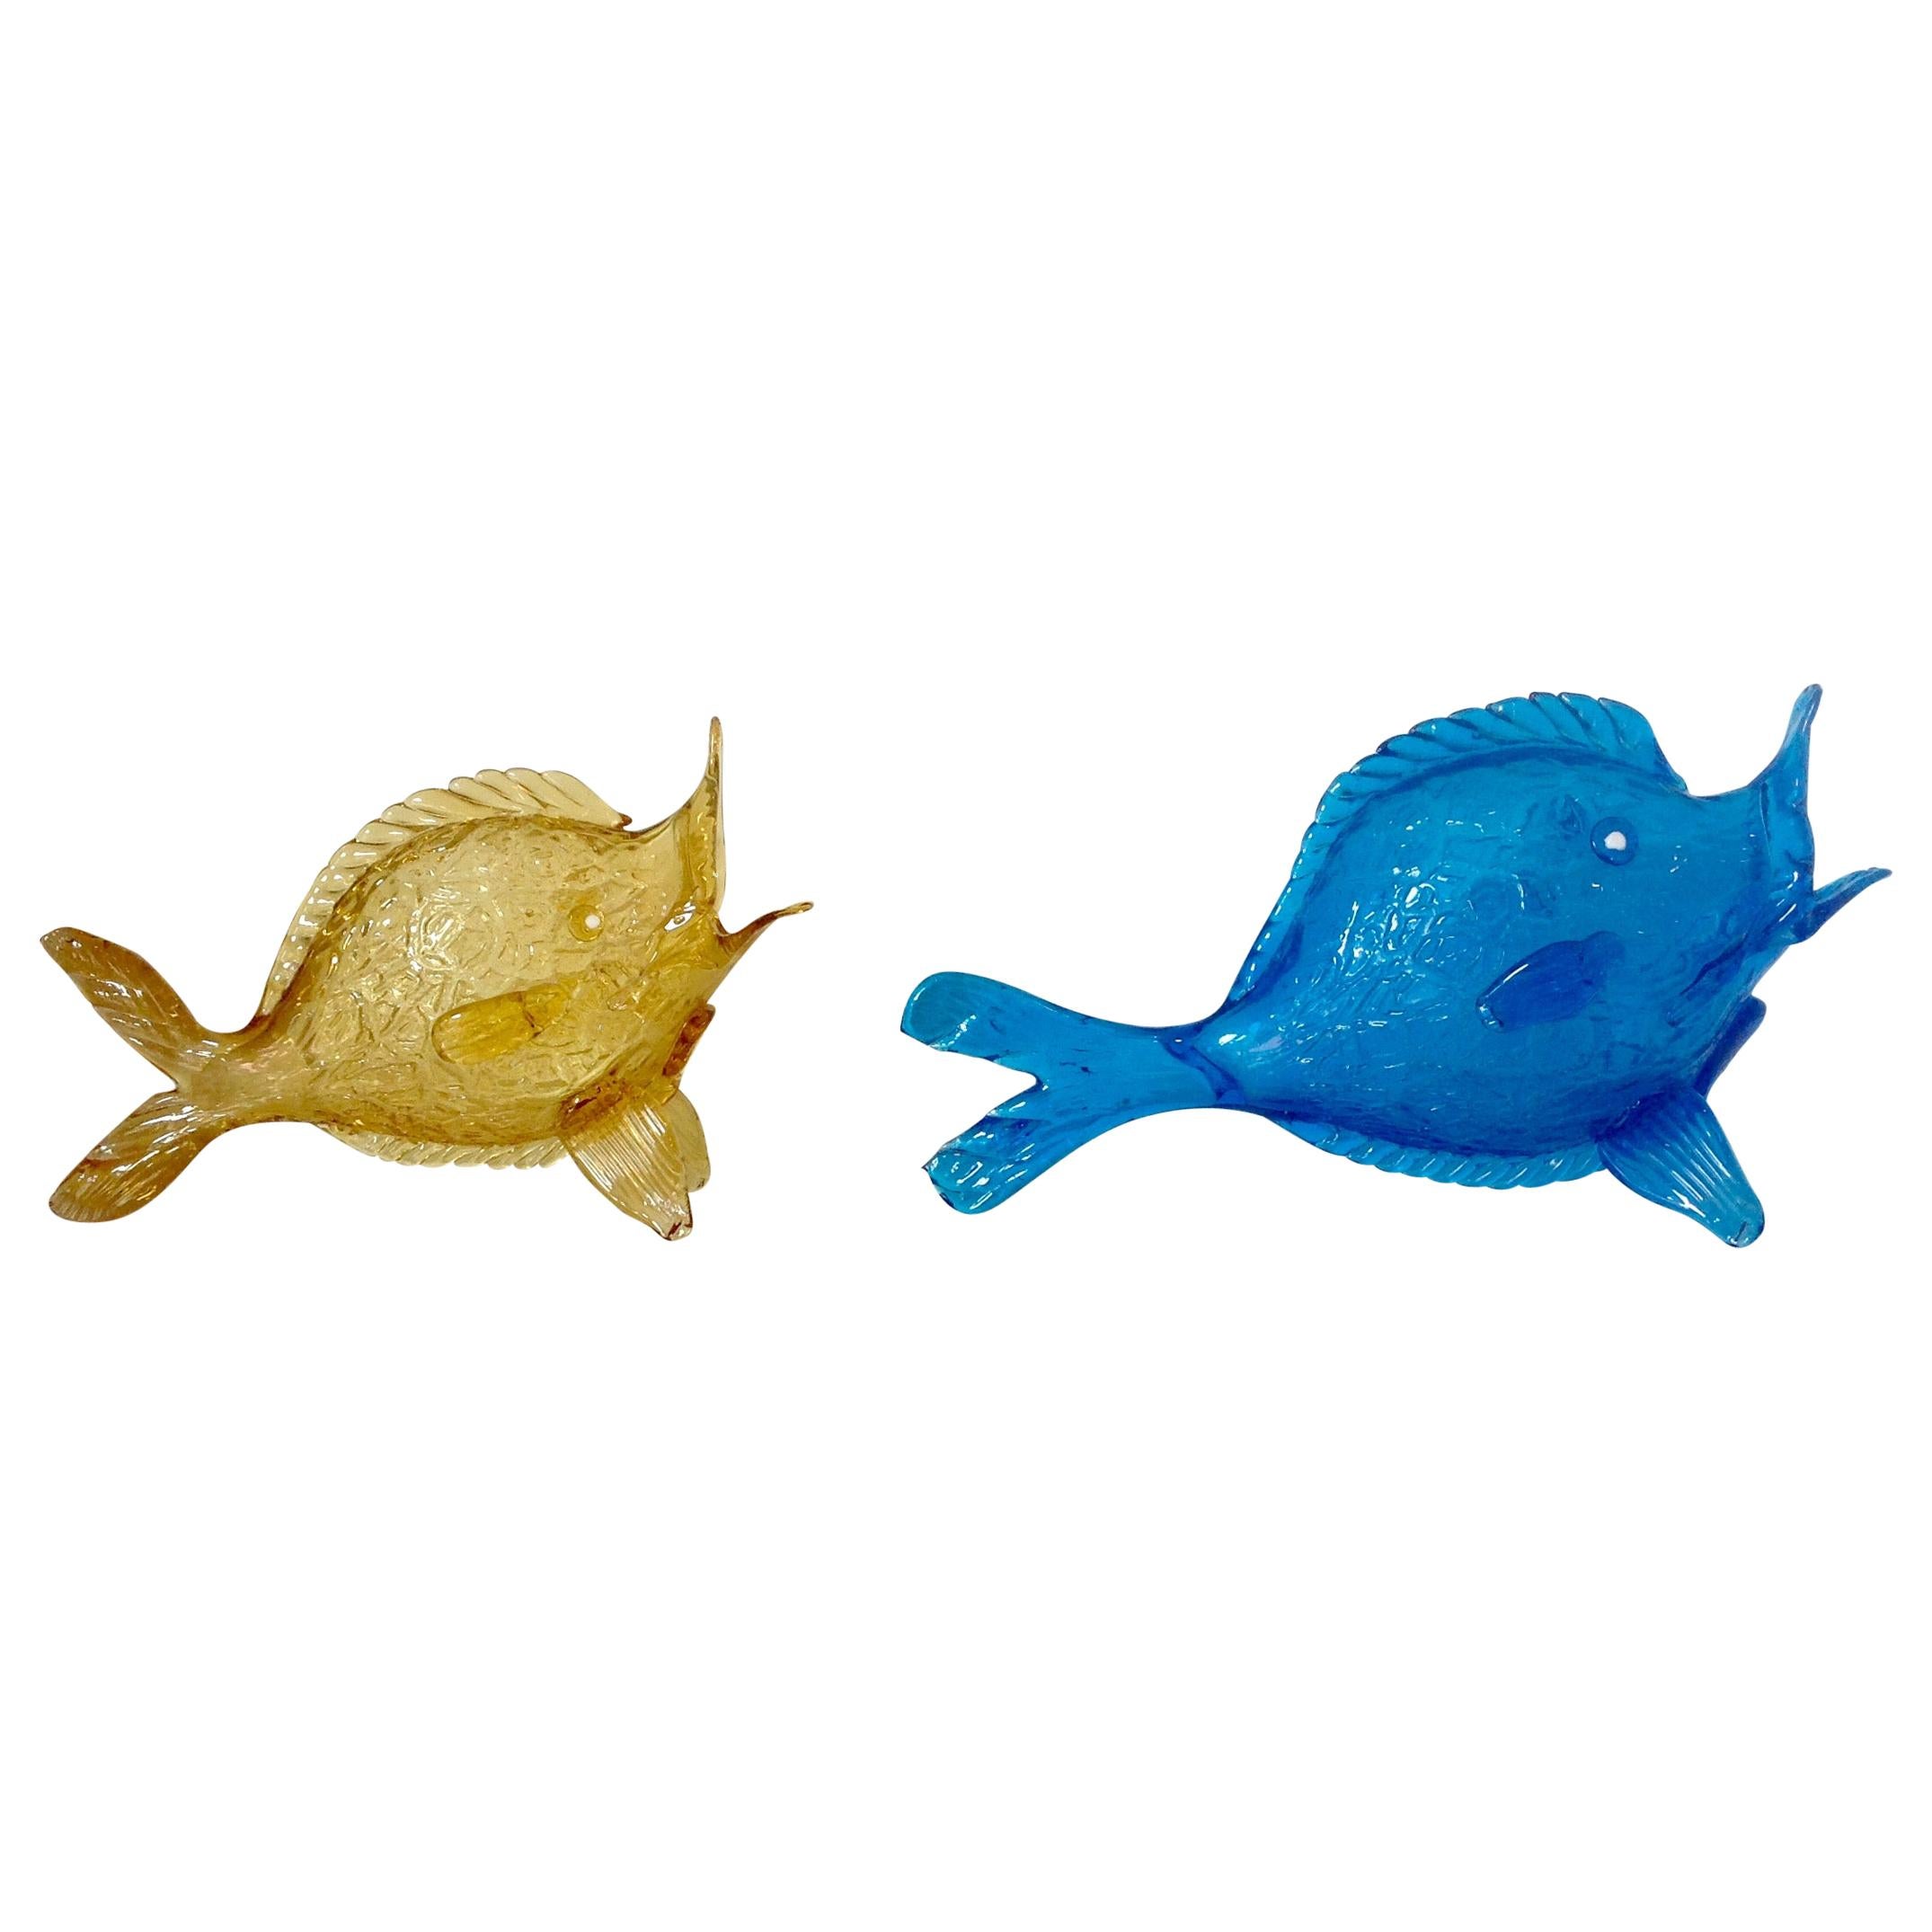 Fratelli Toso Murano Pair of 1930s Fish Sculptures in Blue and Yellow For Sale